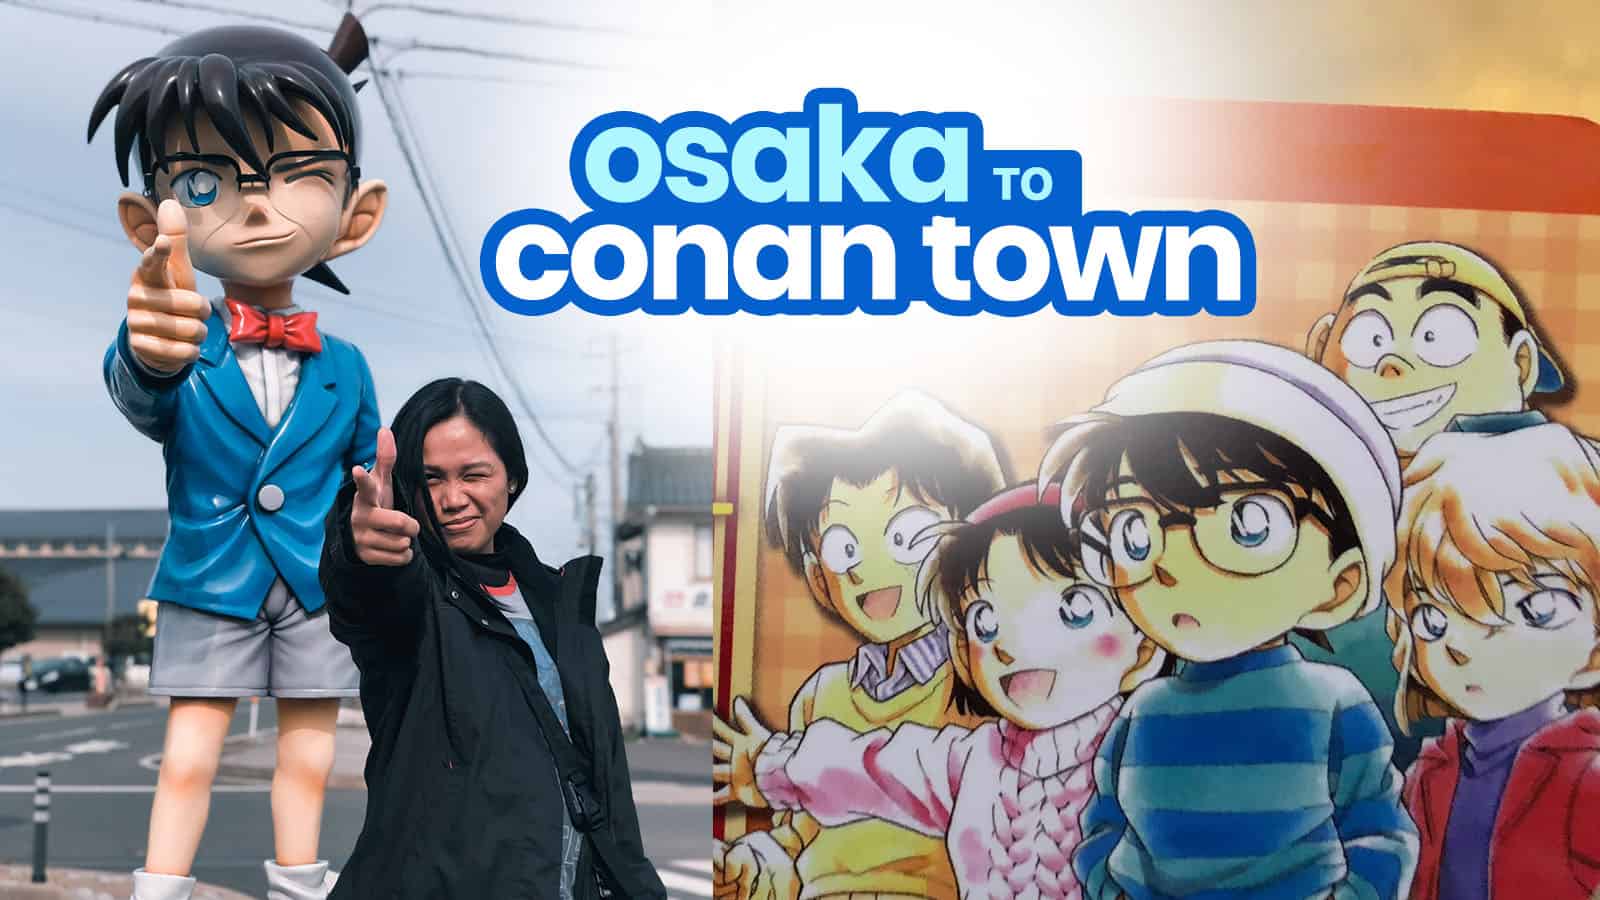 DETECTIVE CONAN TOWN: How to Get There from OSAKA and KANSAI AIRPORT